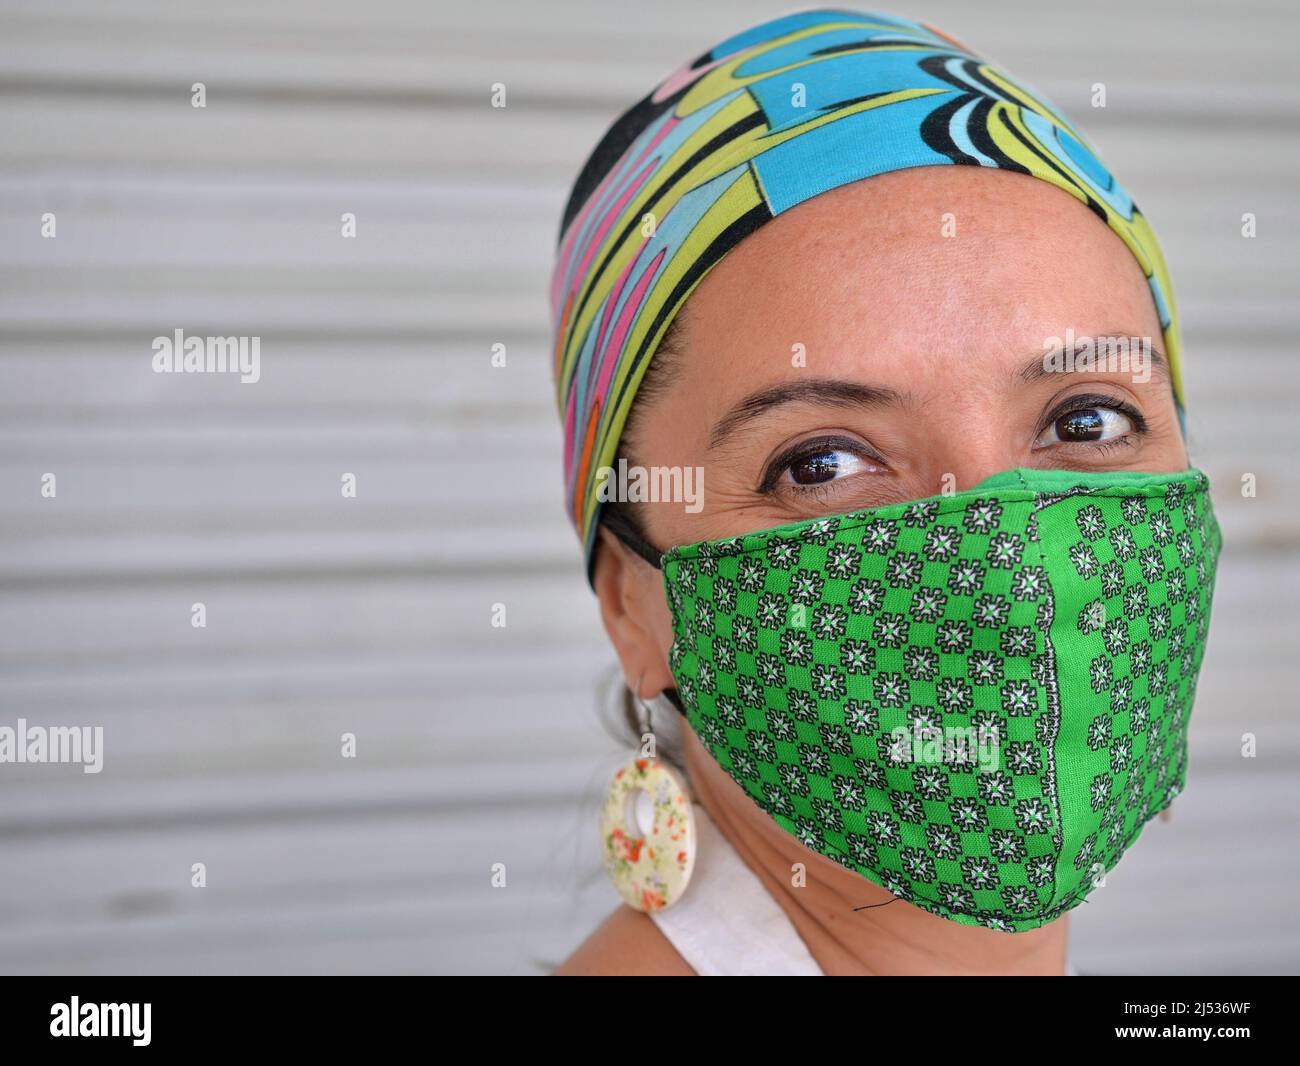 Young positive Caucasian woman with beautiful brown eyes wears a bandana and a green washable cloth face mask during the global coronavirus pandemic. Stock Photo